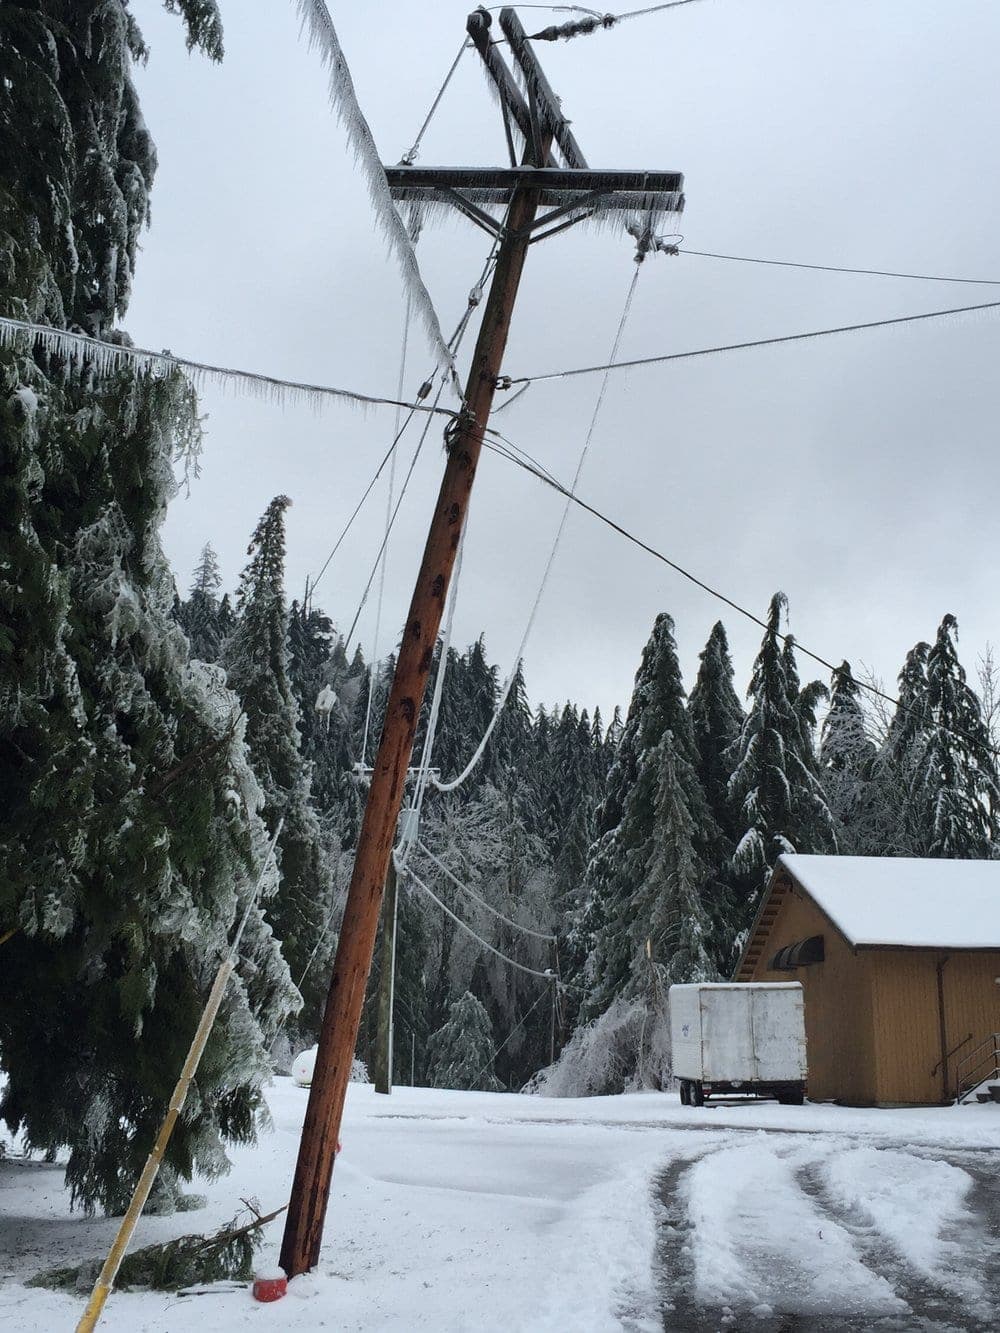 A power line pole teetering from the weight of ice. Photo: Bill Gerber